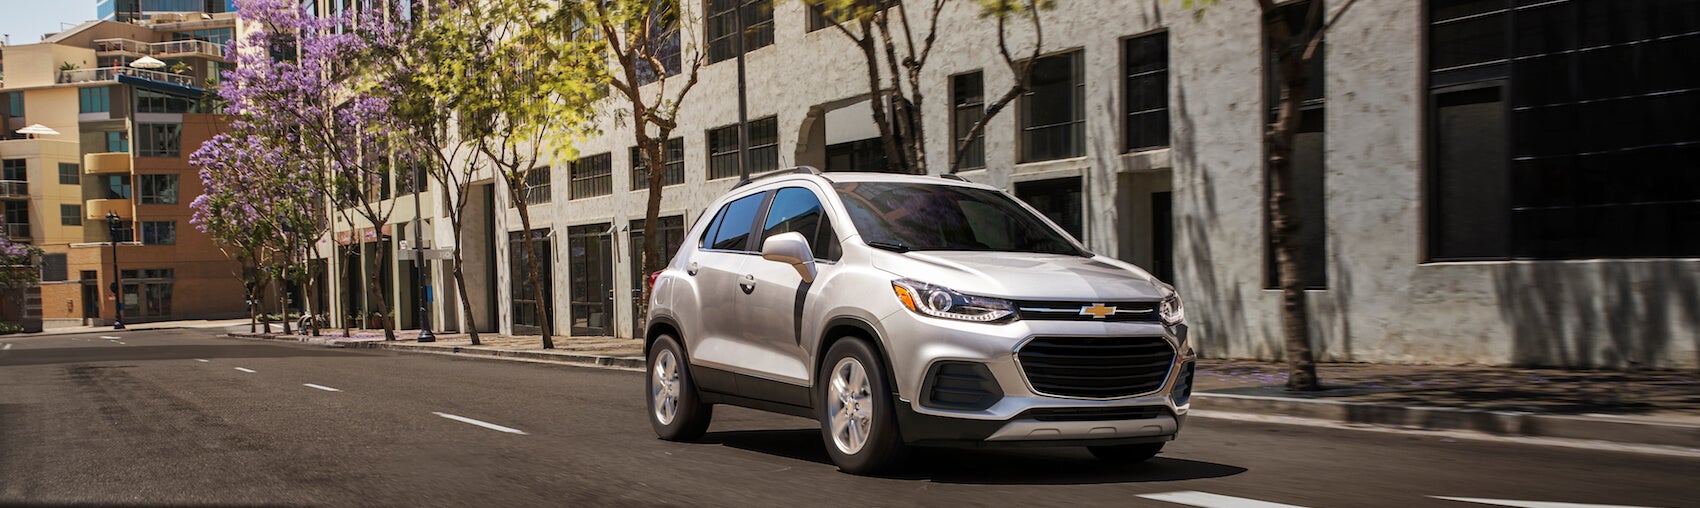 Chevy Trax Lease Deals